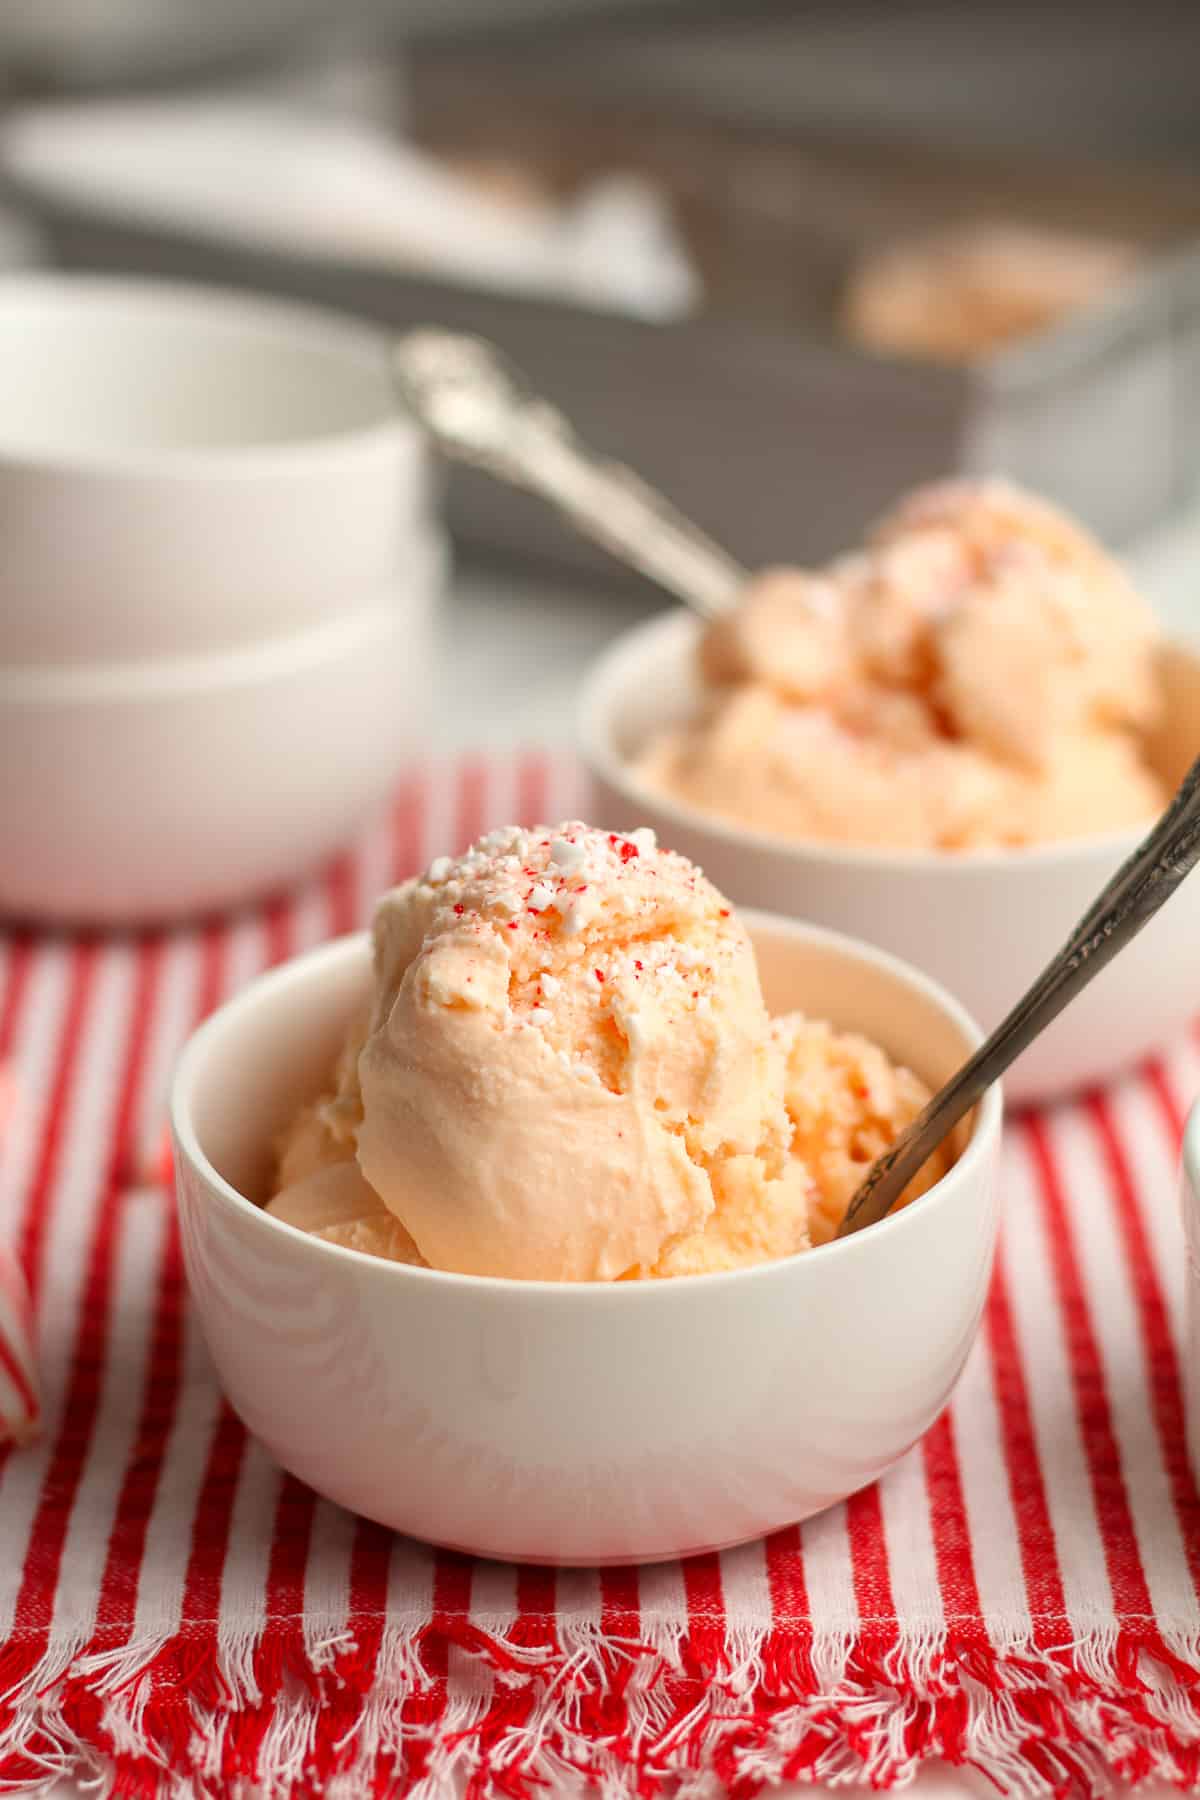 Side view of two bowls of ice cream, with the pan in the background.